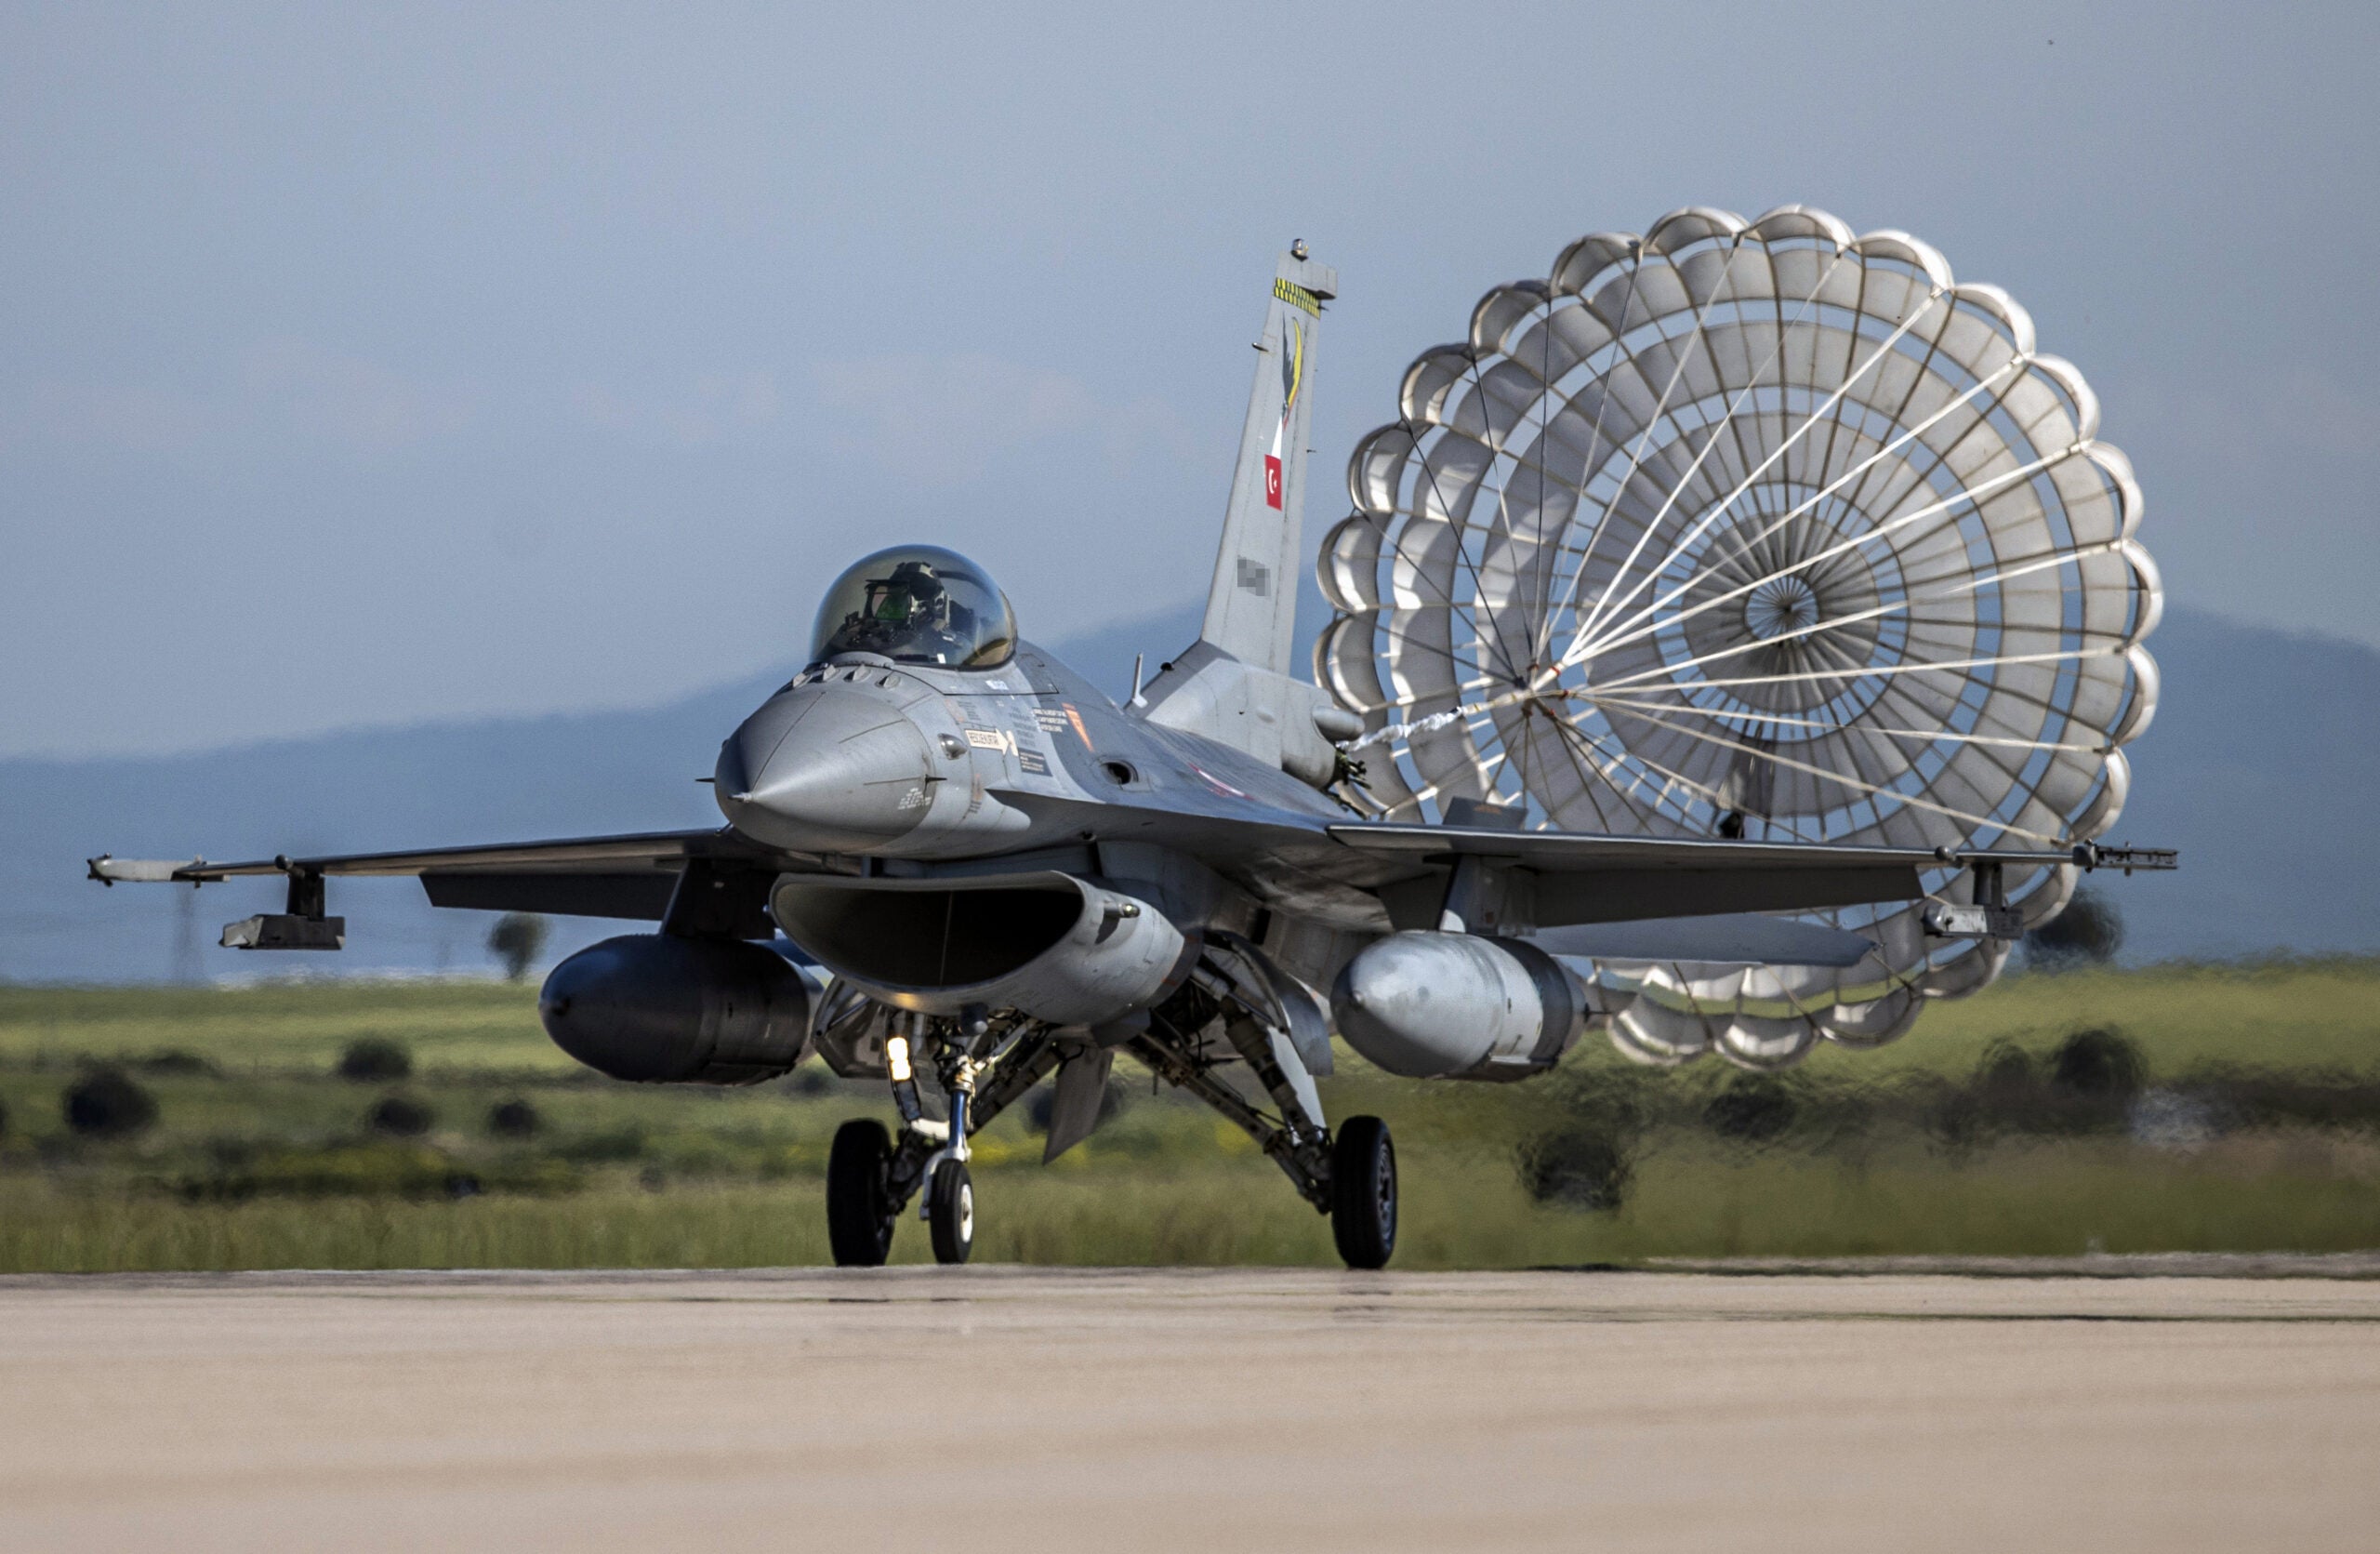 BALIKESIR, TURKIYE - MAY 22: Turkish Air Force F-16 fighter aircraft is seen during test flight in Balikesir, Turkiye on May 22, 2022. The 161st Fleet Command, the only fleet of the Turkish Air Force with two call names - coded as "Eagle" during the day and "Bat" at night - takes an active role in both the protection of the airspace in Aegean Region and the combat against terrorism. (Photo by Ali Atmaca/Anadolu Agency via Getty Images)